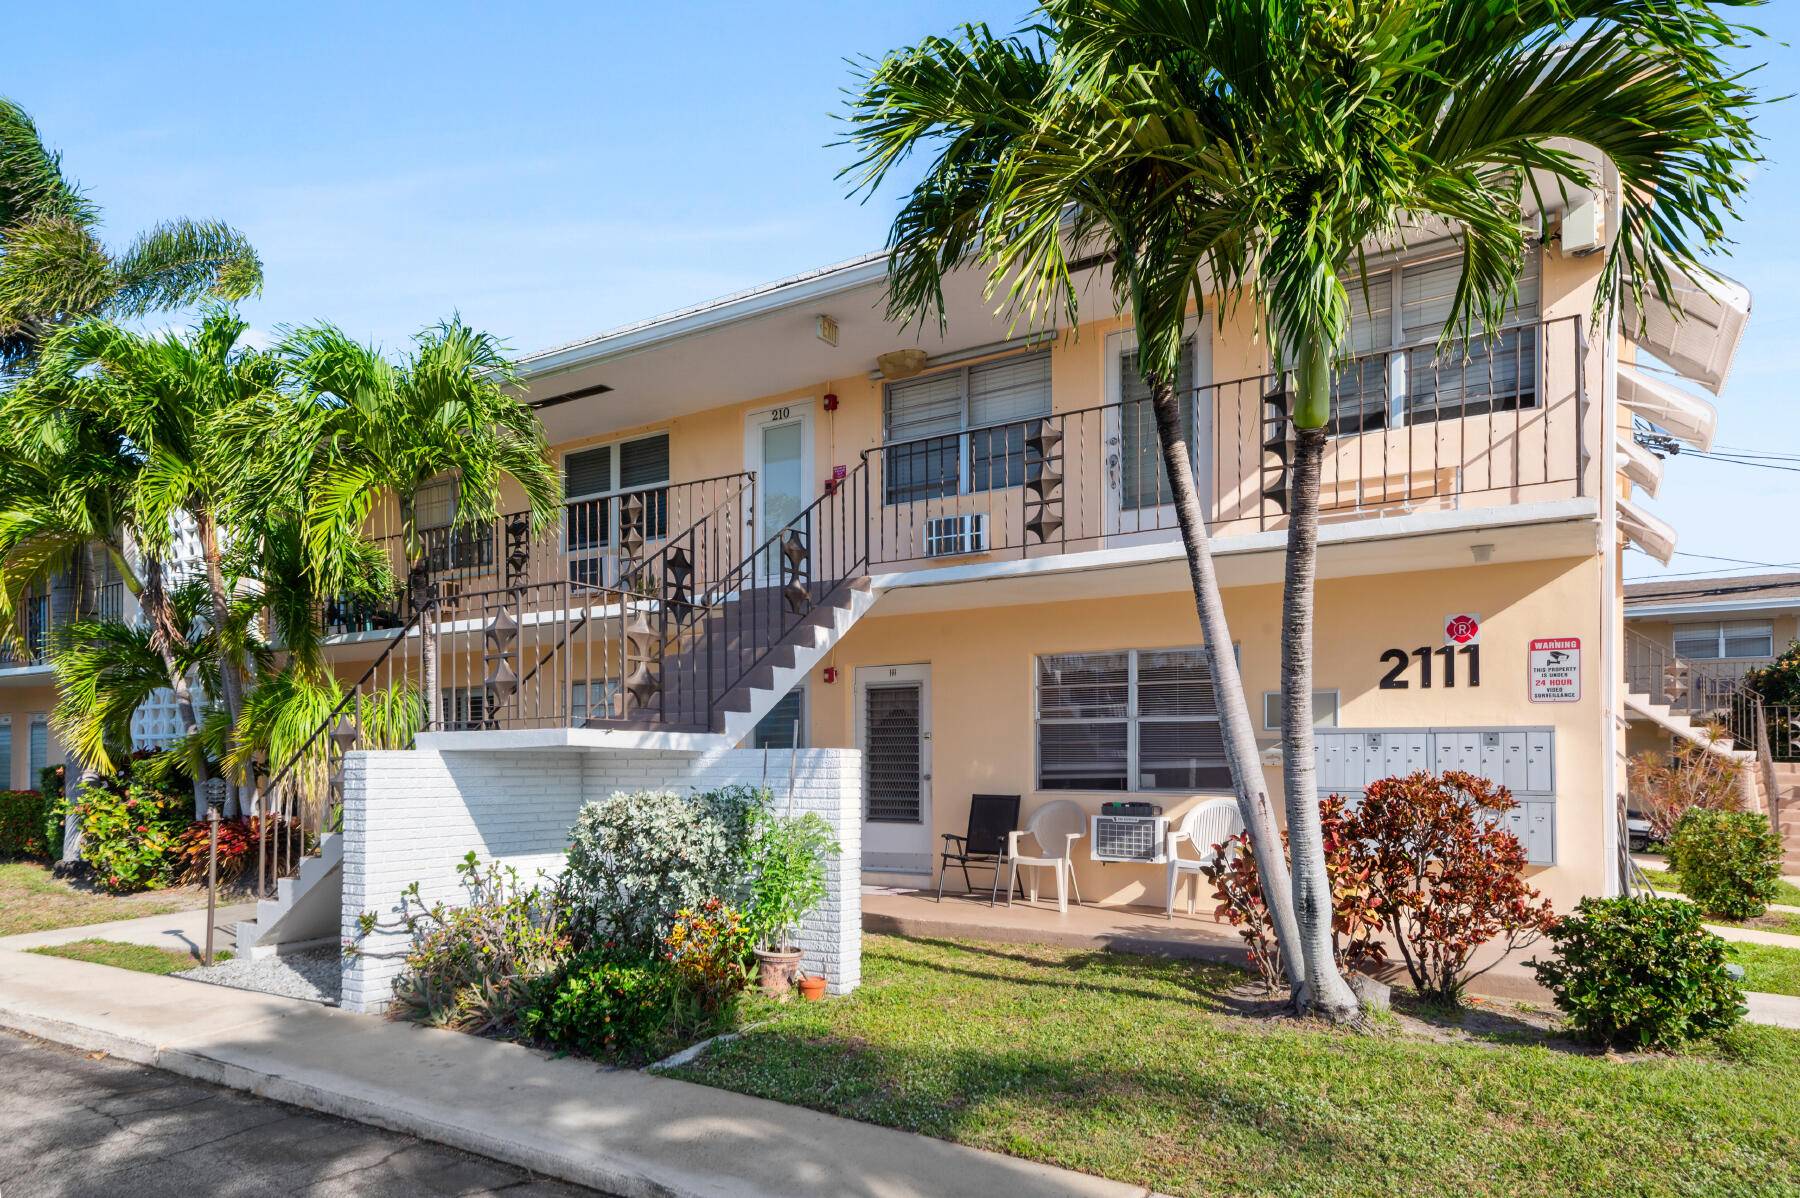 Ideal 1 Bed, 1 Bath remodeled beach retreat or year round residence in Fort Lauderdale.